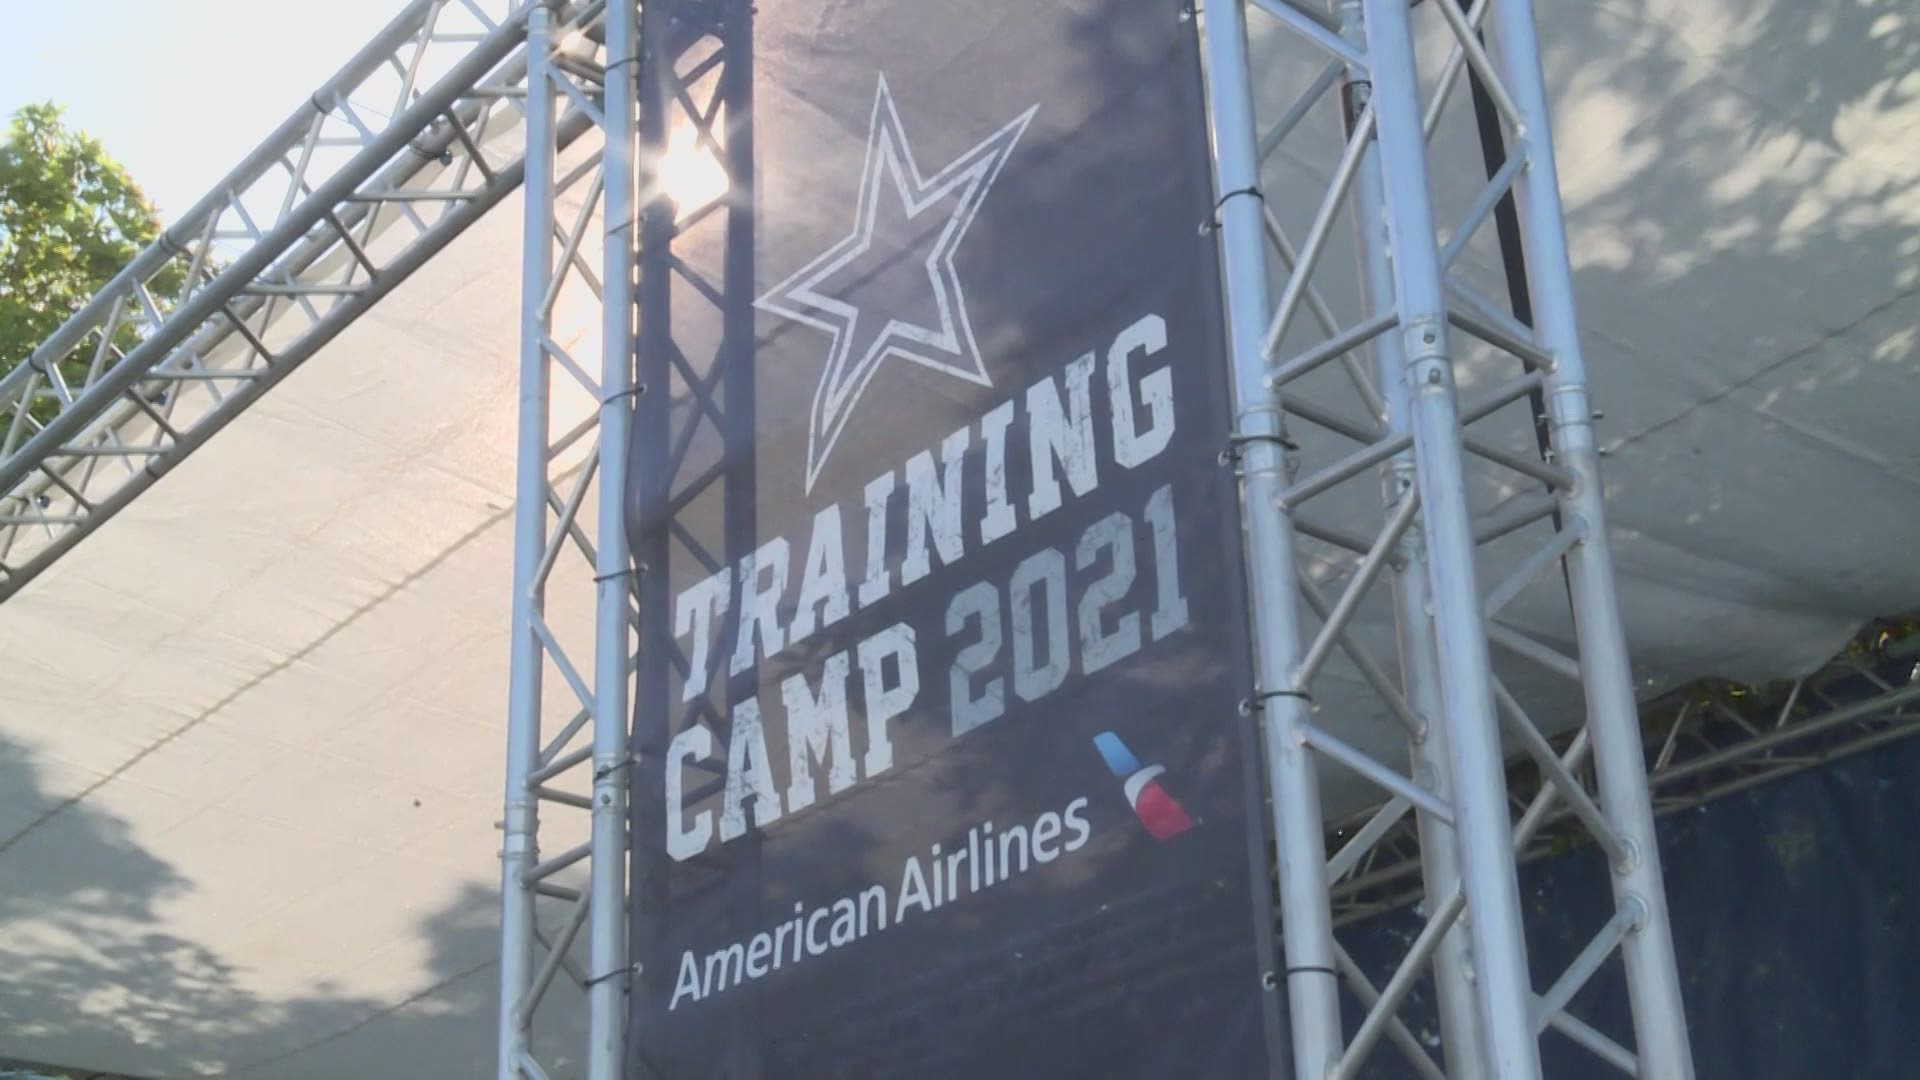 Joe Reinagel and Vinnie Vinzetta are in Oxnard, California to get all the latest on Dallas heading into the NFL season.